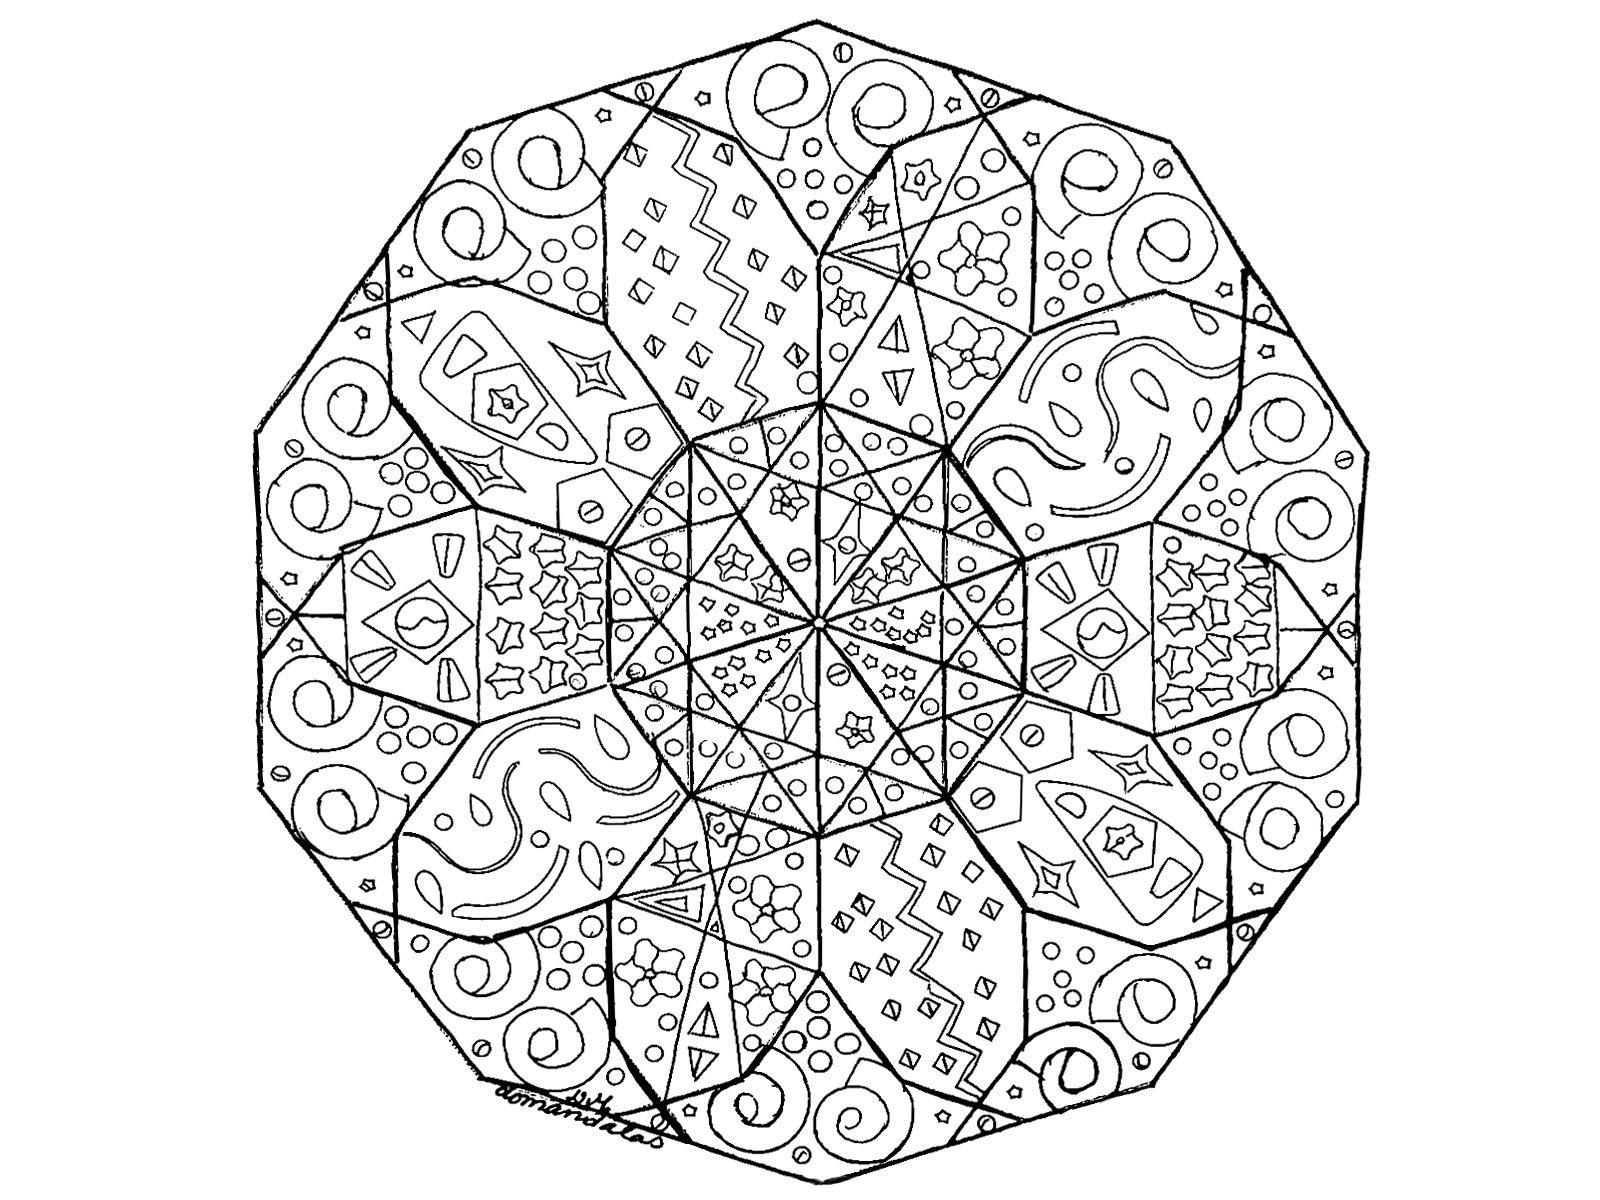 When coloring can really relax you ... This is the case with this Mandala coloring page of high quality. It can sometimes be even more relaxing when coloring and passively listening to music : don't hesitate to do it !